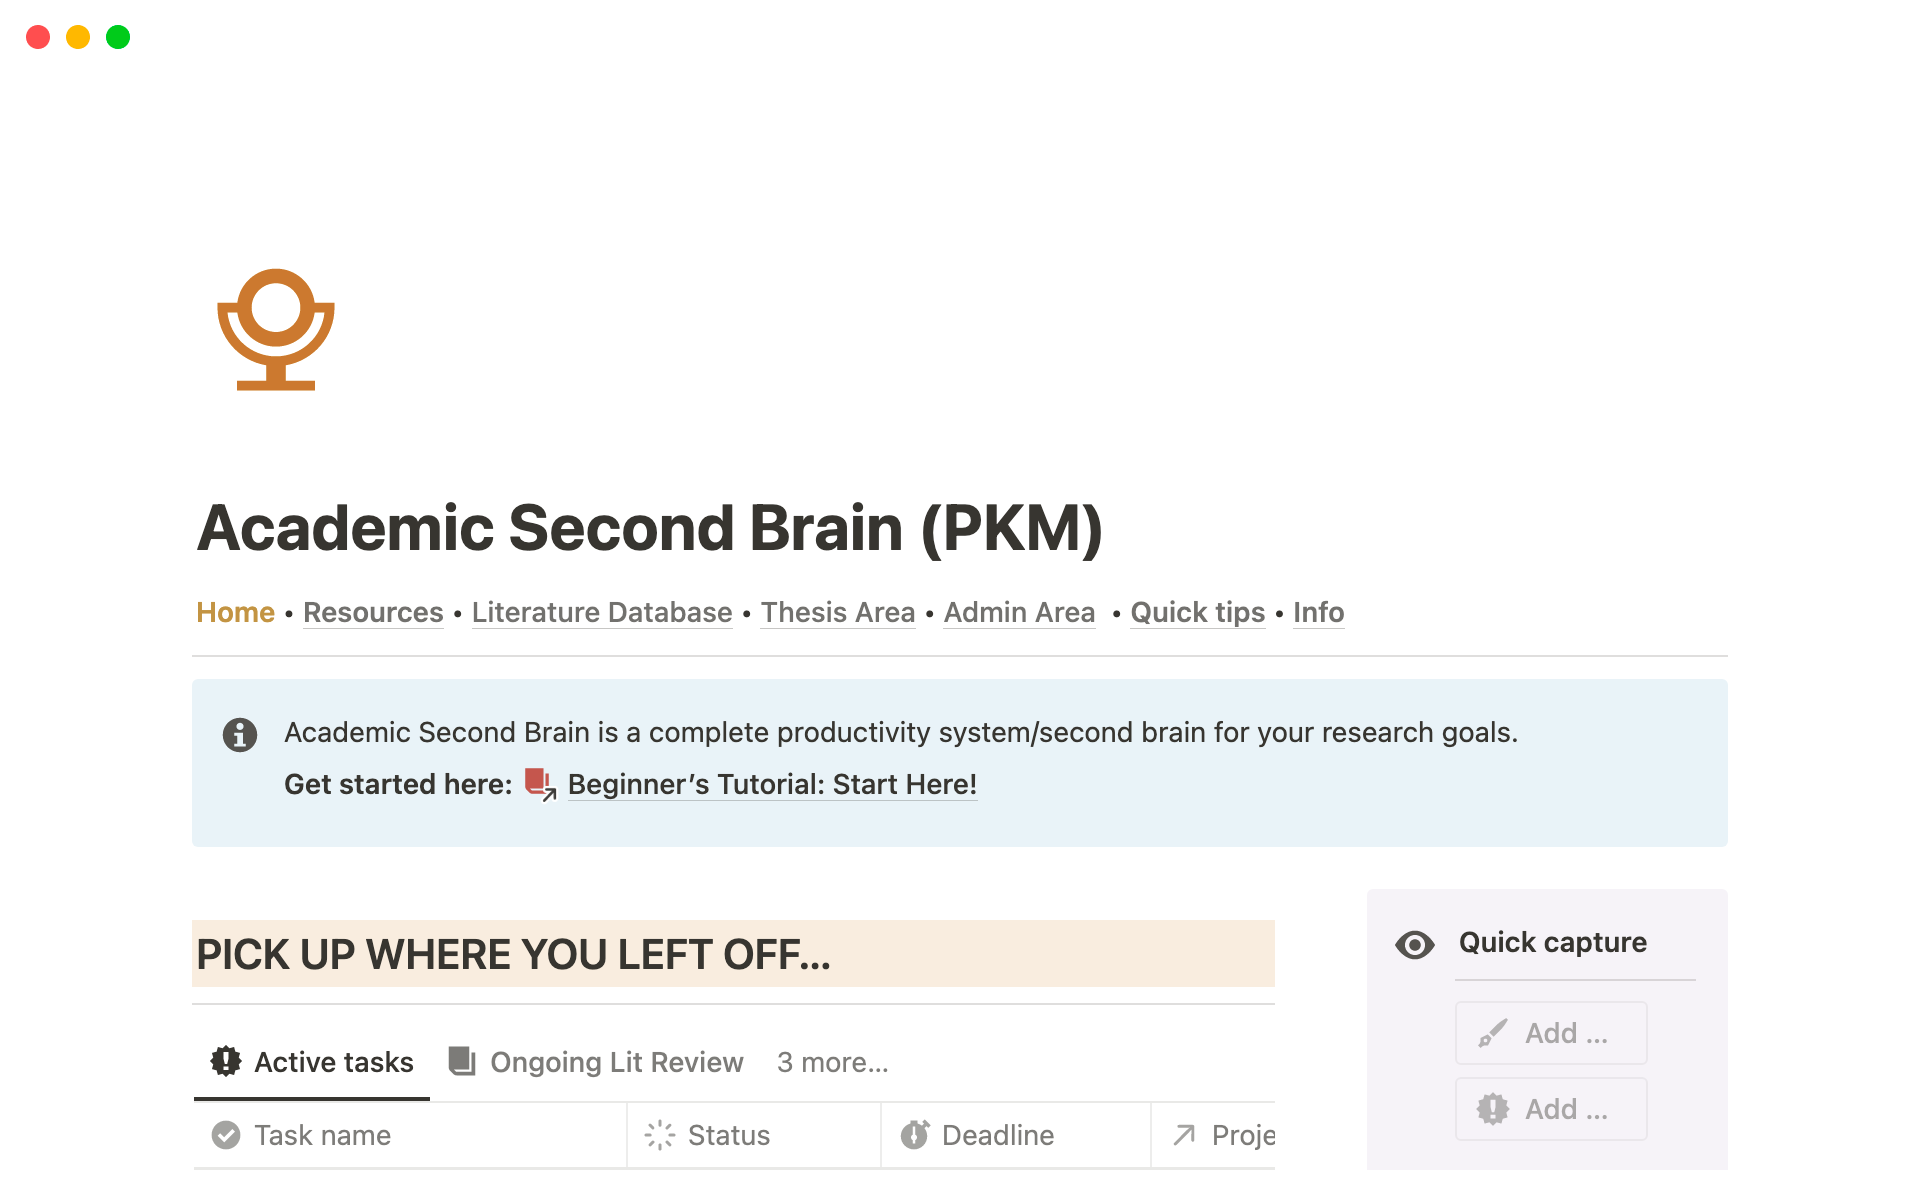 Academic Second Brain is a complete productivity system/second brain for research goals and processes.